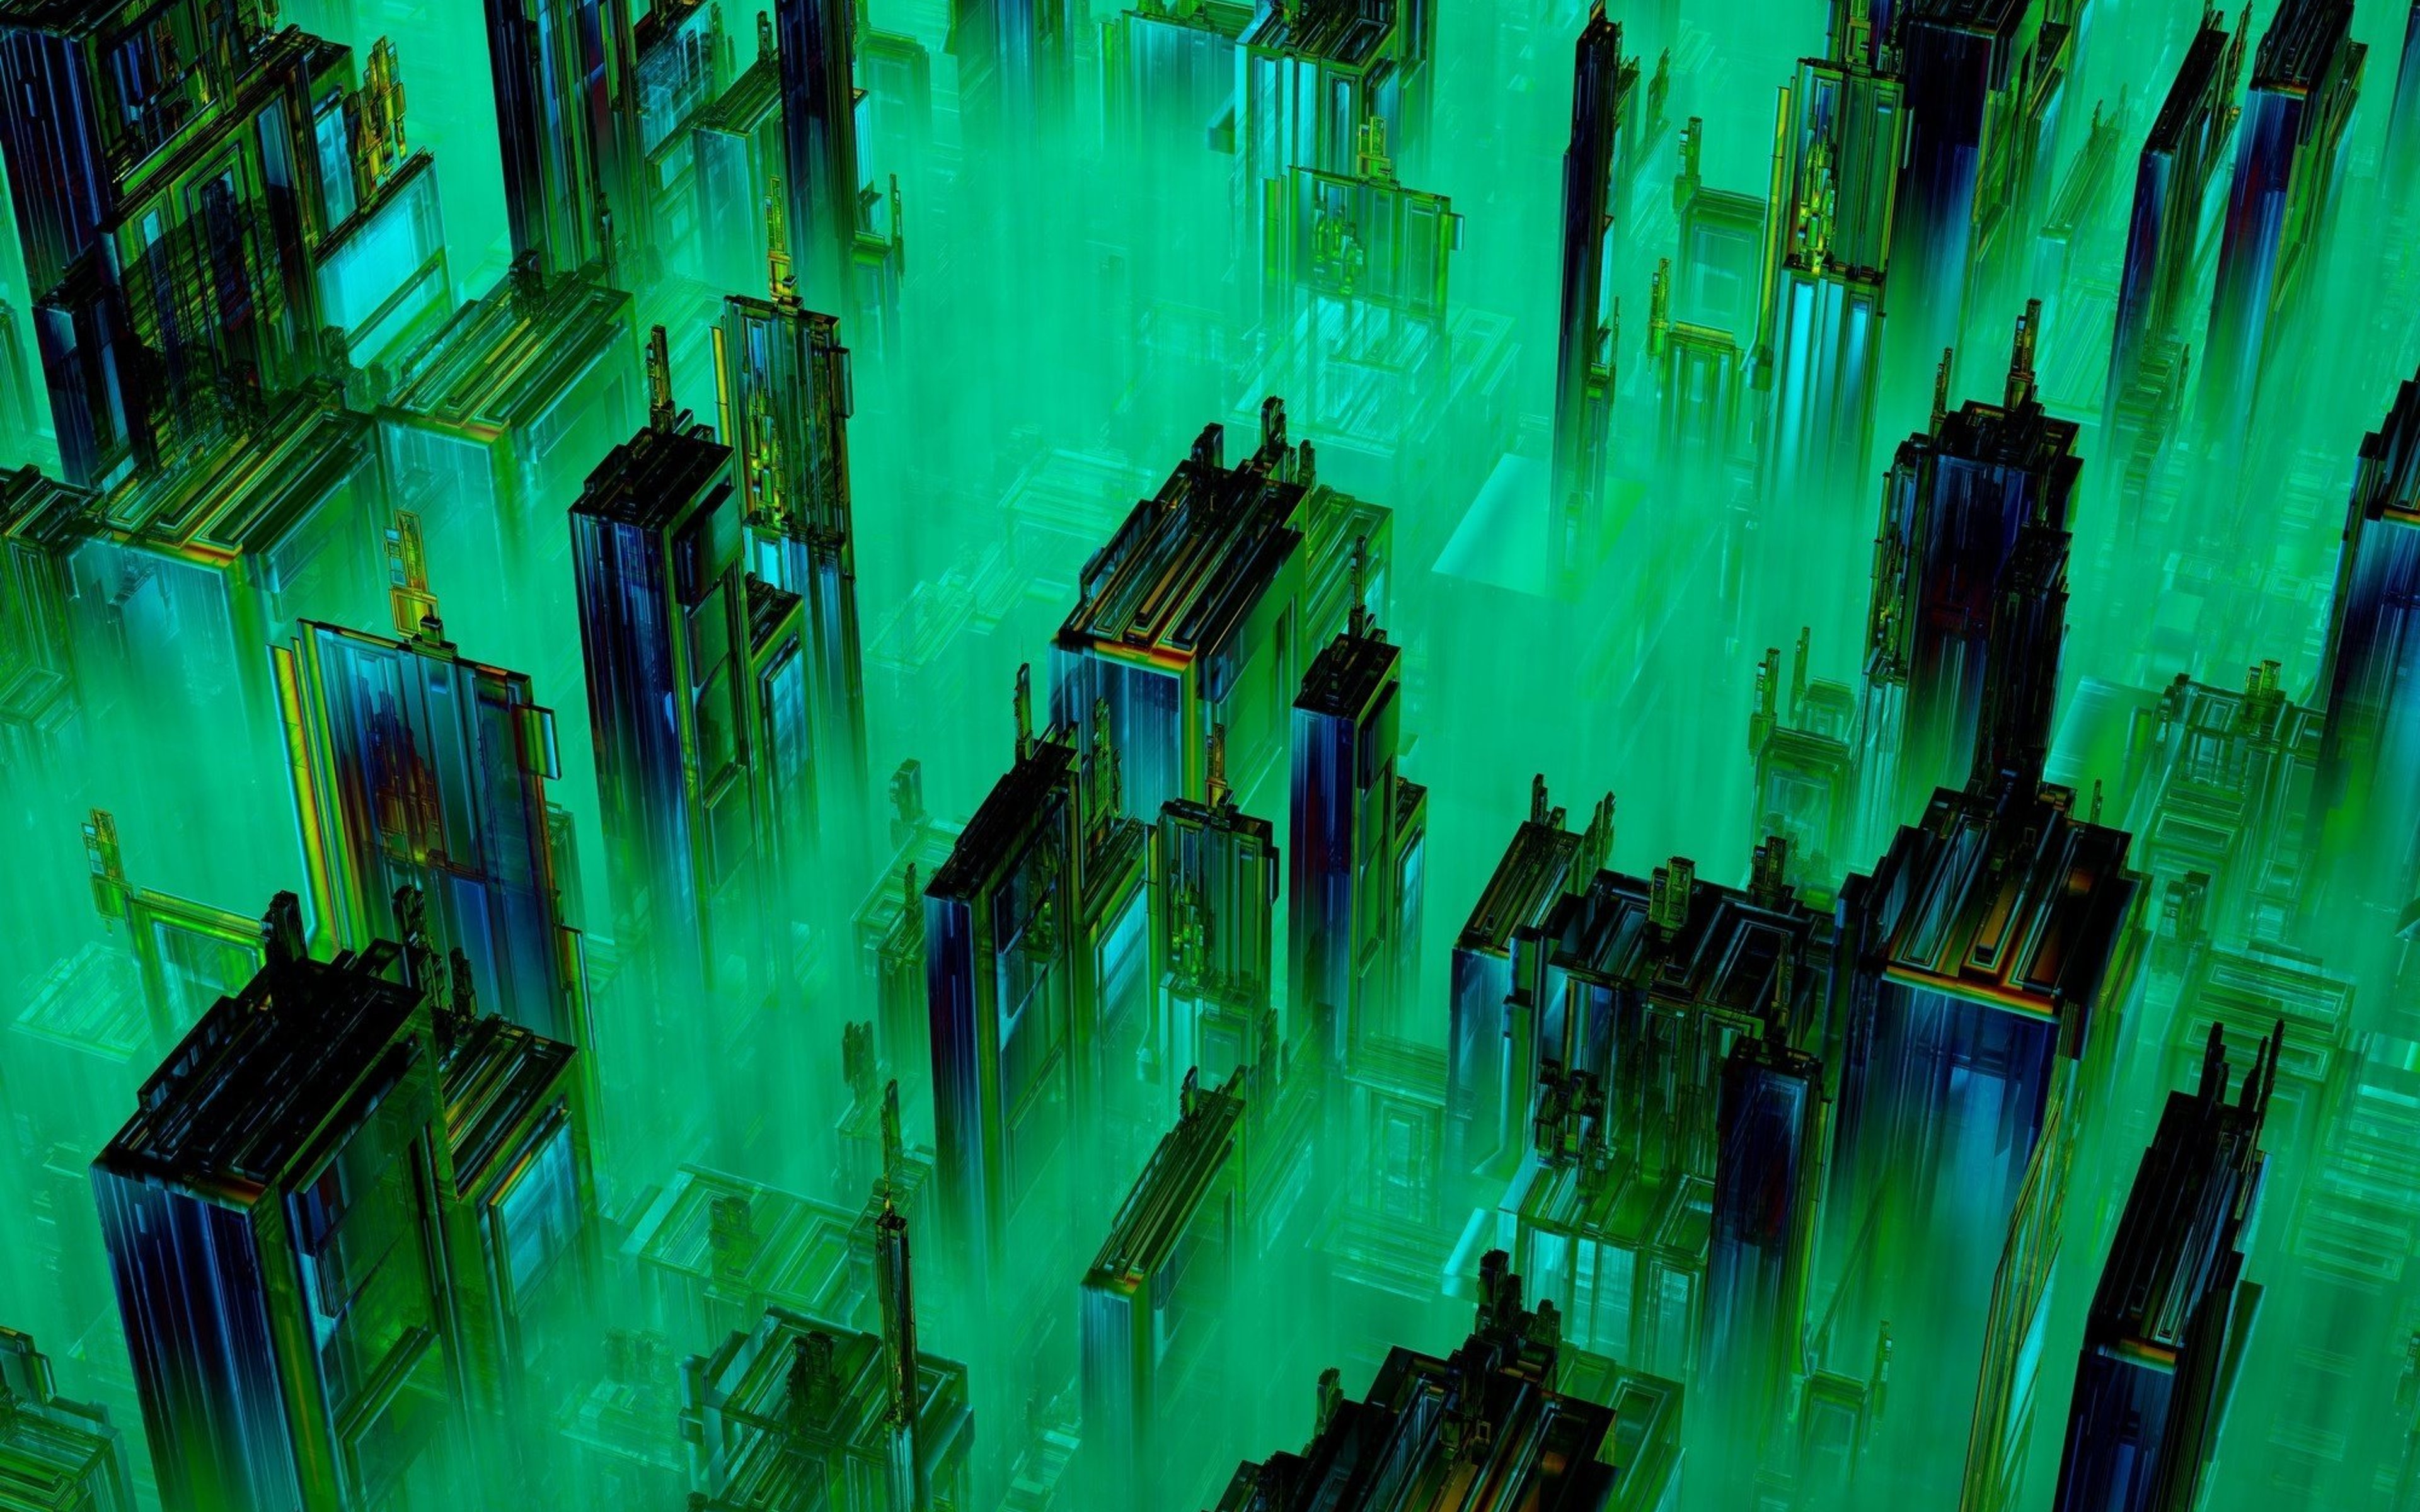 Abstract illustration of skyscraper buildings